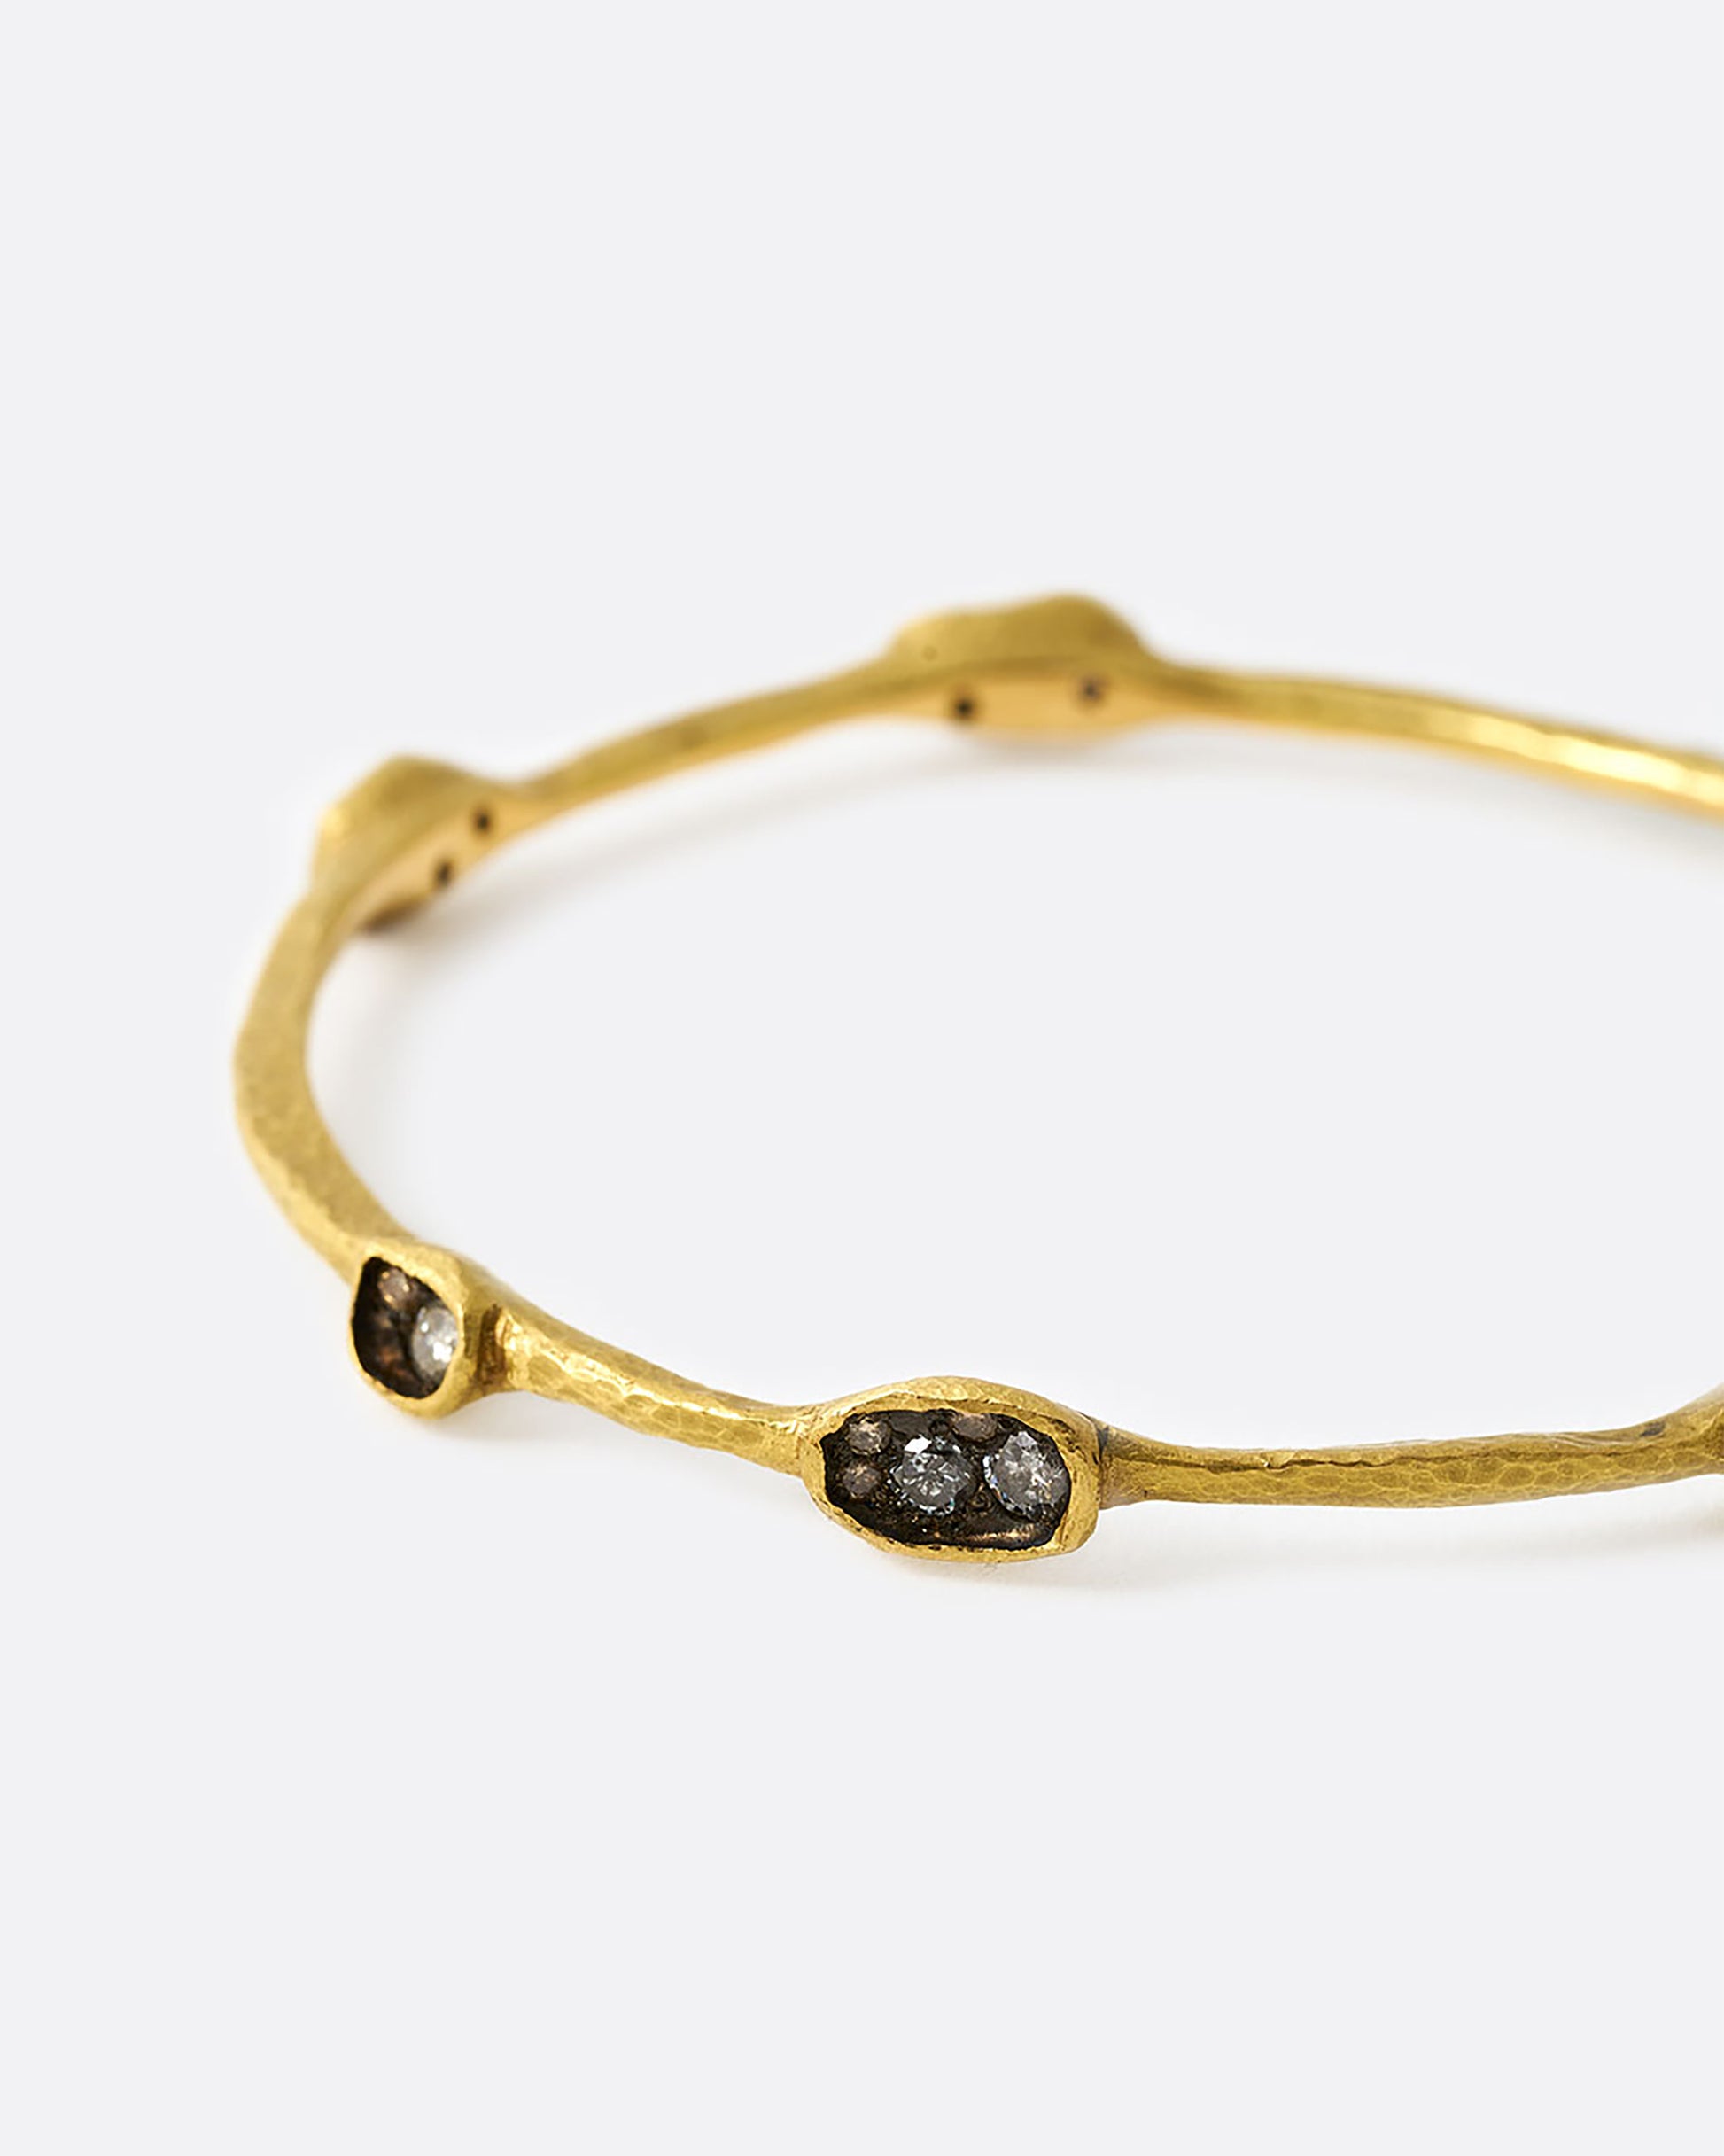 Yellow gold bangle bracelet with diamonds in oval settings, shown from the side.